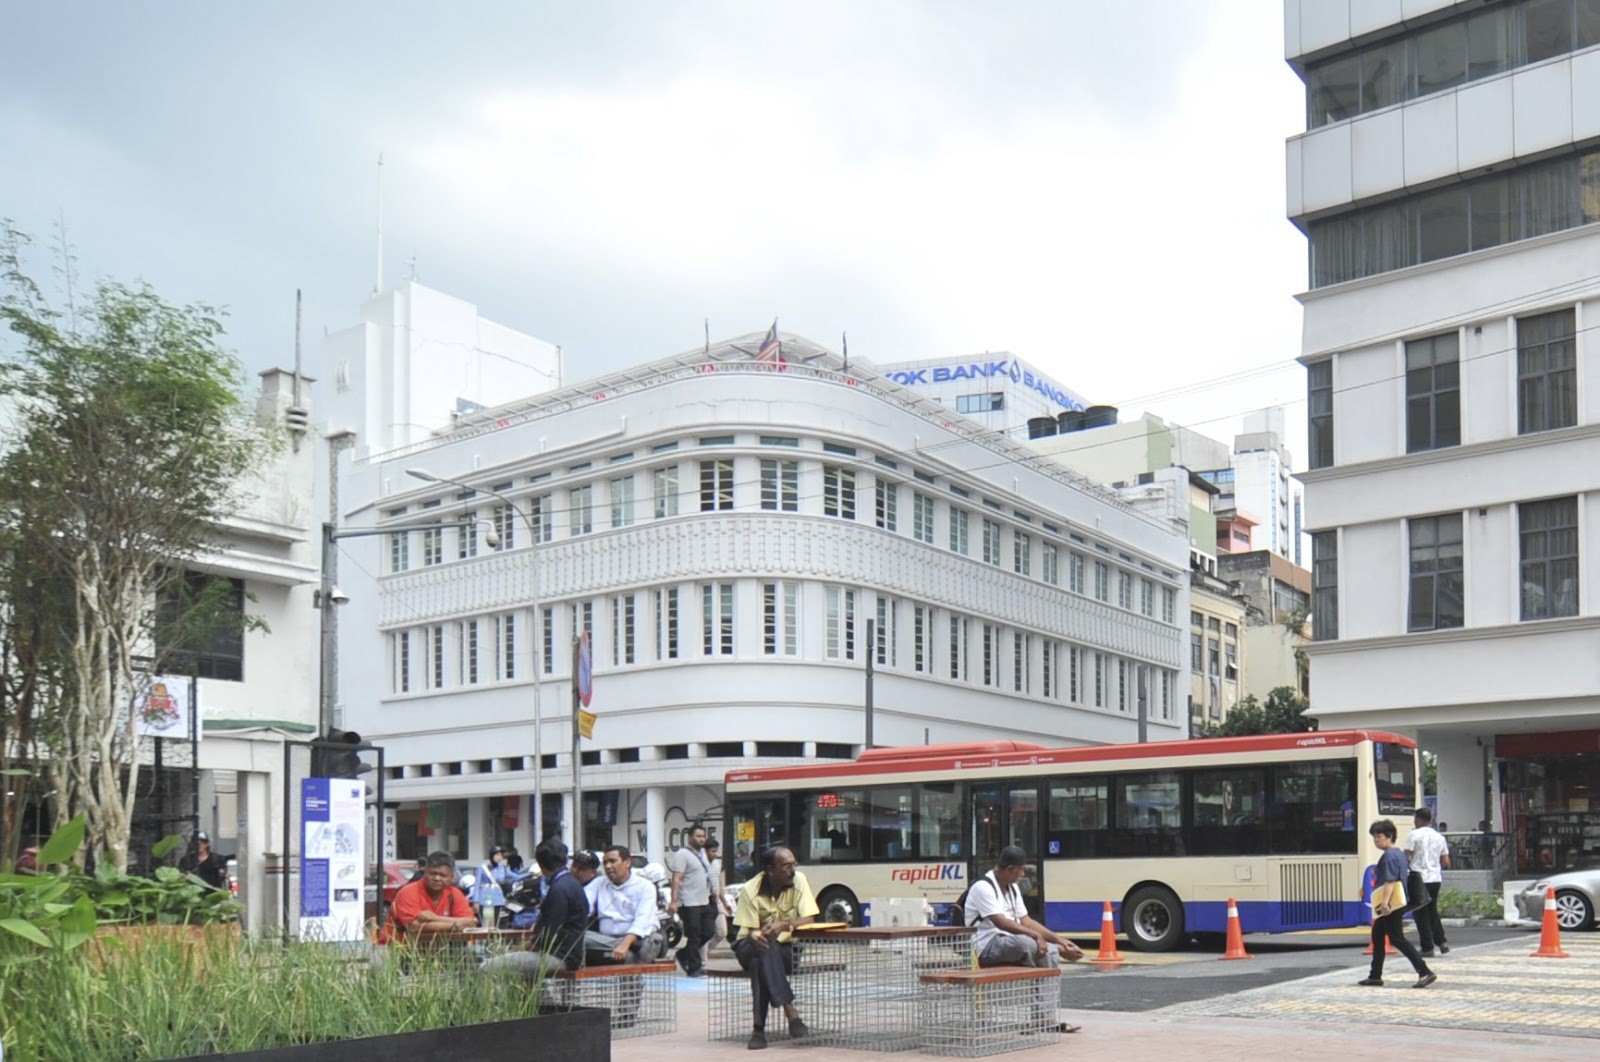 Kuala Lumpur’s older buildings are being revilatised, including 2 Hang Kasturi, a bank headquarters dating from 1938 that has been repurposed as a creative hub. Photo: courtesy of Think City